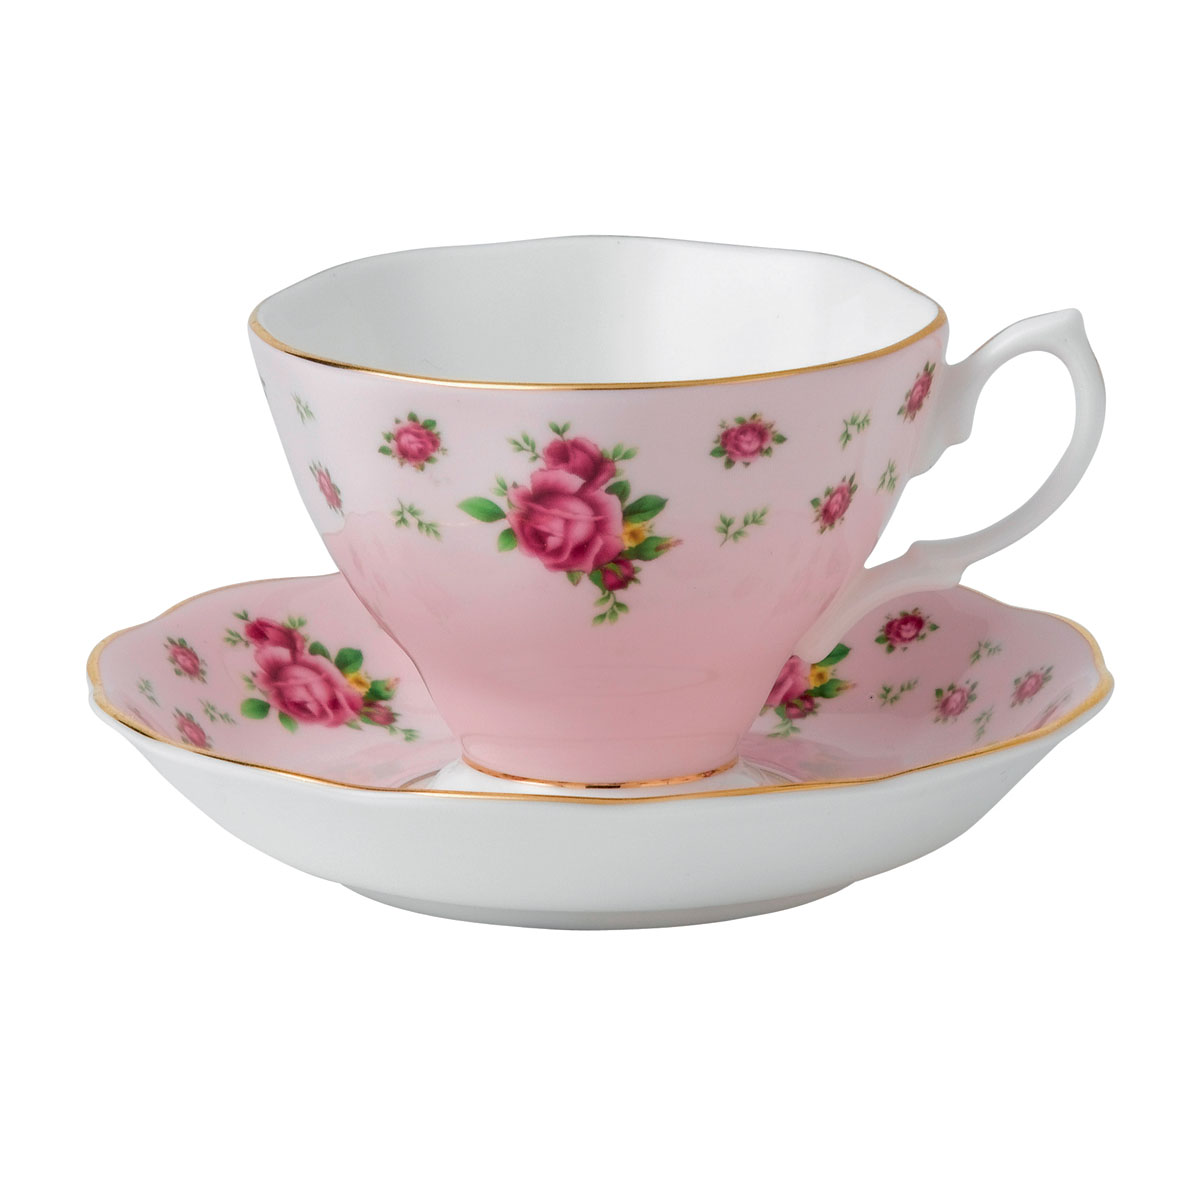 Royal Albert China New Country Roses Pink, Vintage Formal Teacup and Saucer, Boxed Set